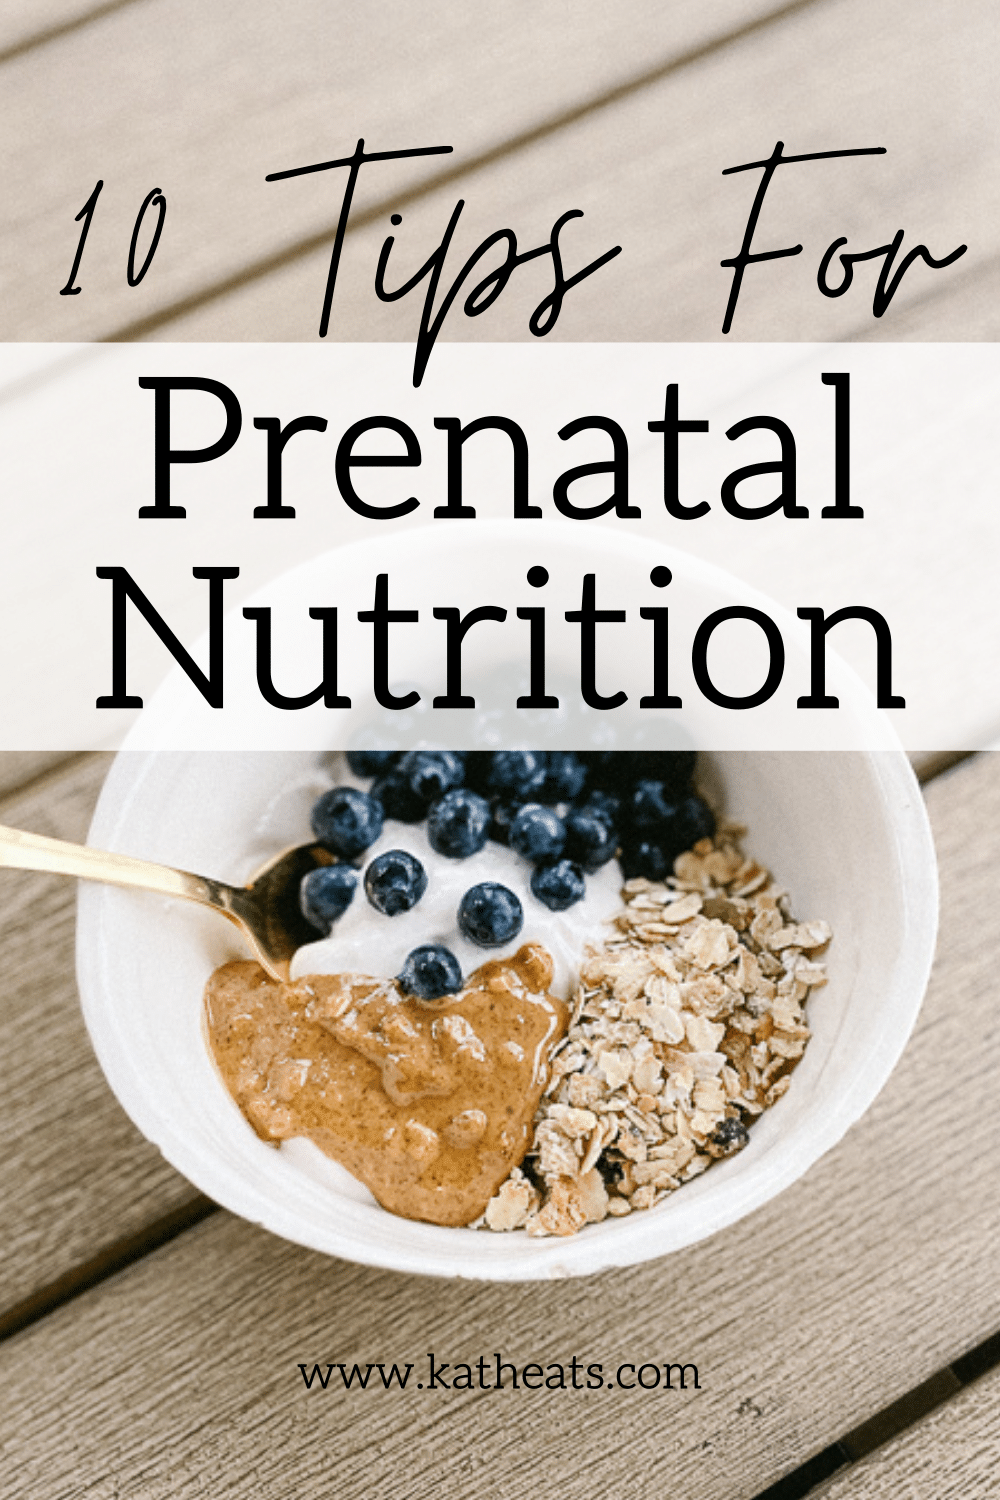 10 Tips For Prenatal Nutrition: bowl of yogurt with oats, blueberries and almond butter - with text overlay.